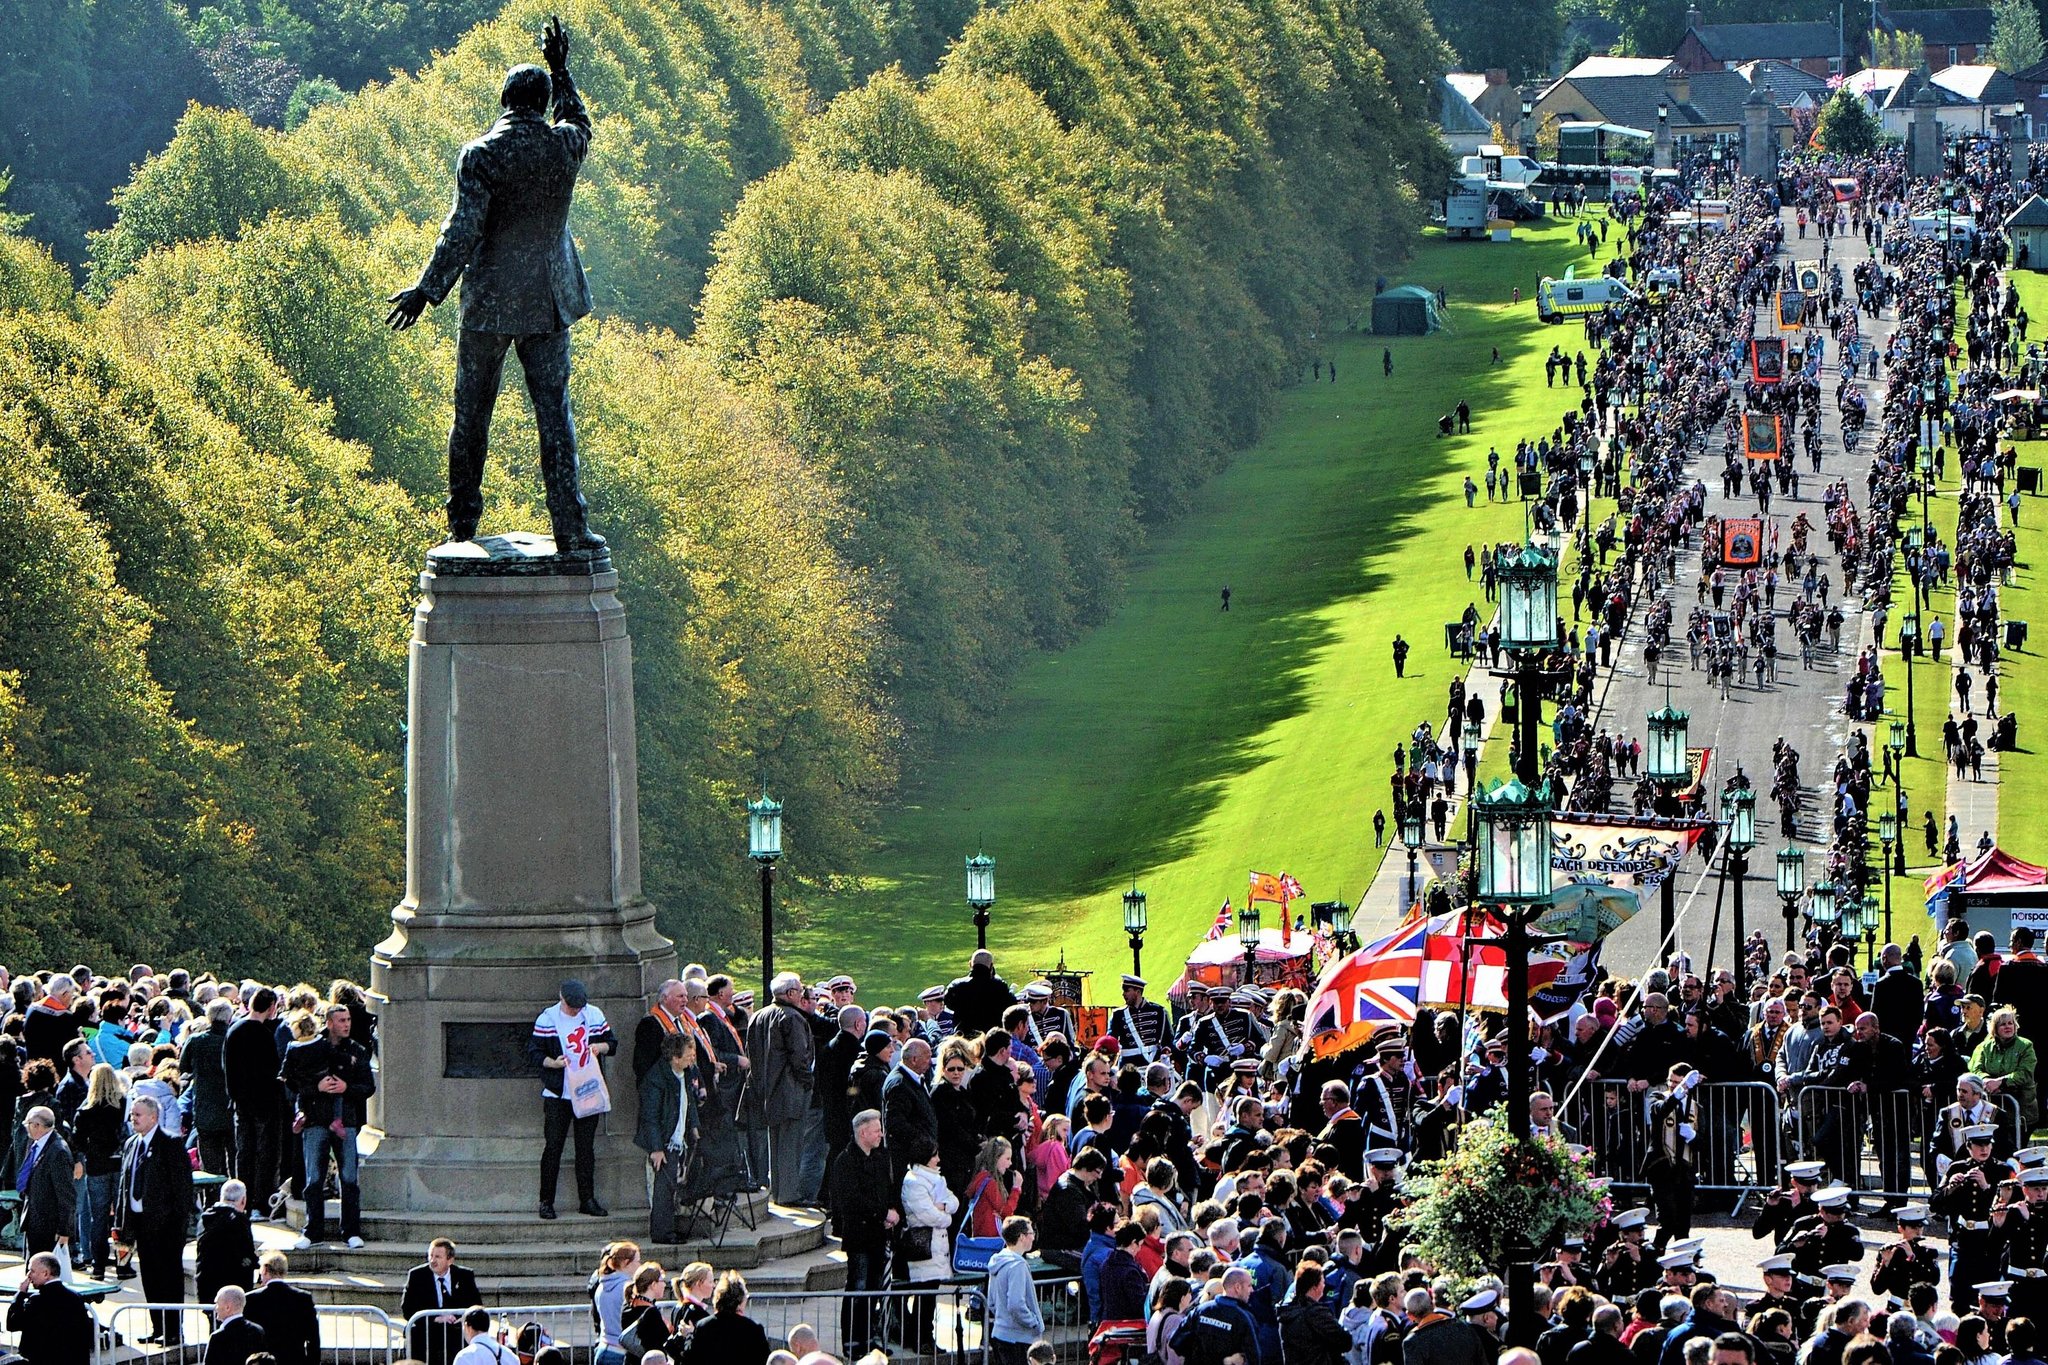 NI Centennial parade a 'once in a lifetime spectacle': tourist body